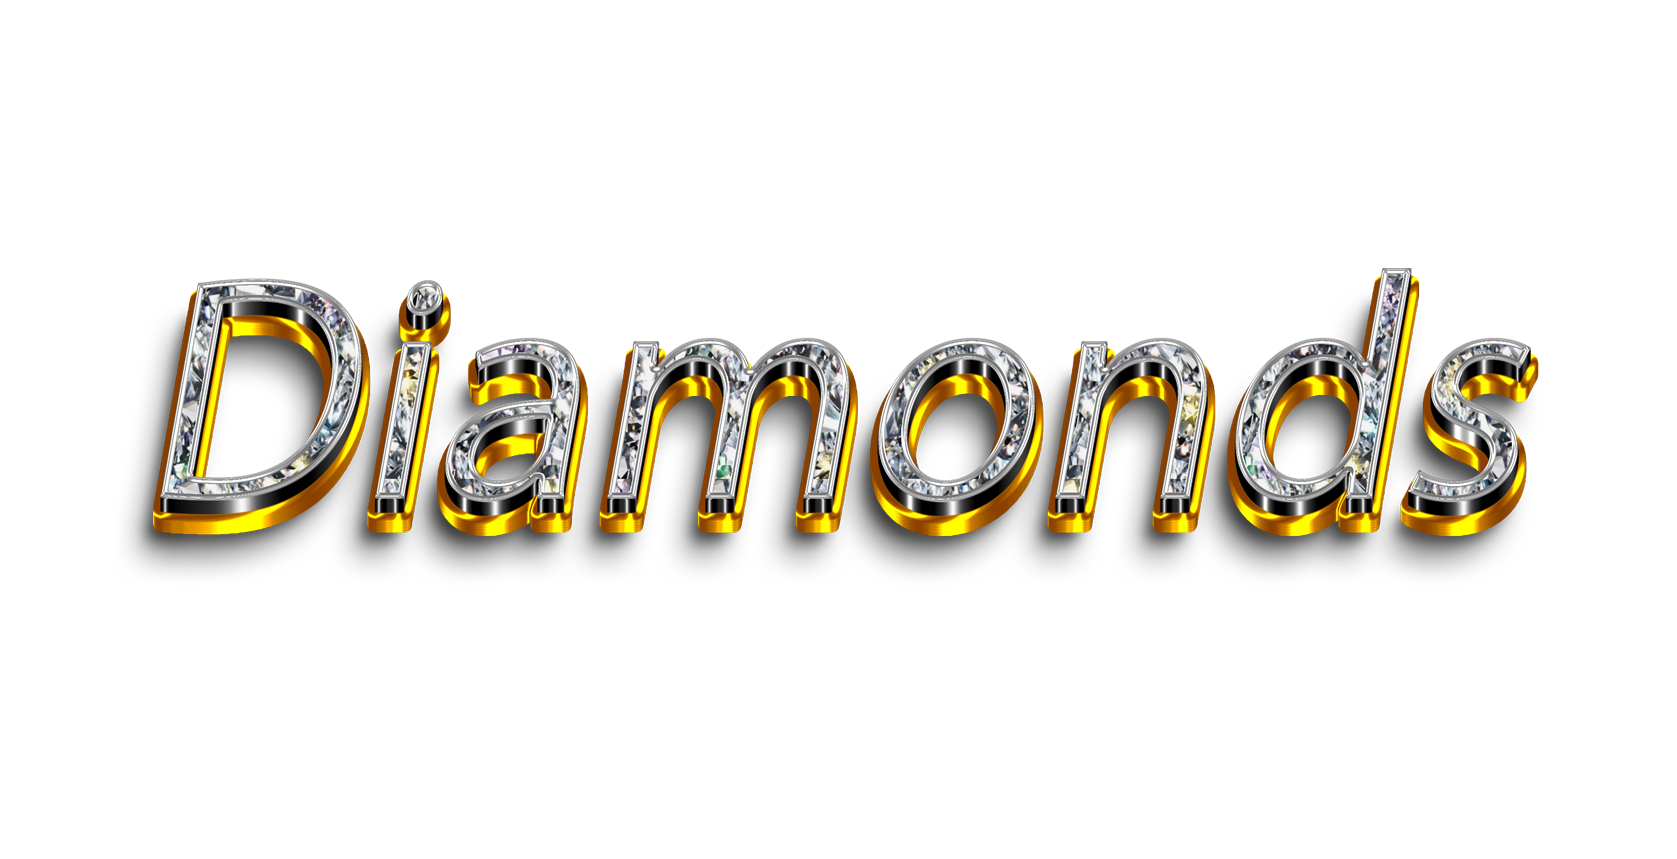 Diamonds png, word Diamonds png, Diamonds word png, Diamonds text png, Diamonds letters png, Diamonds word diamond gold text typography PNG images transparent background